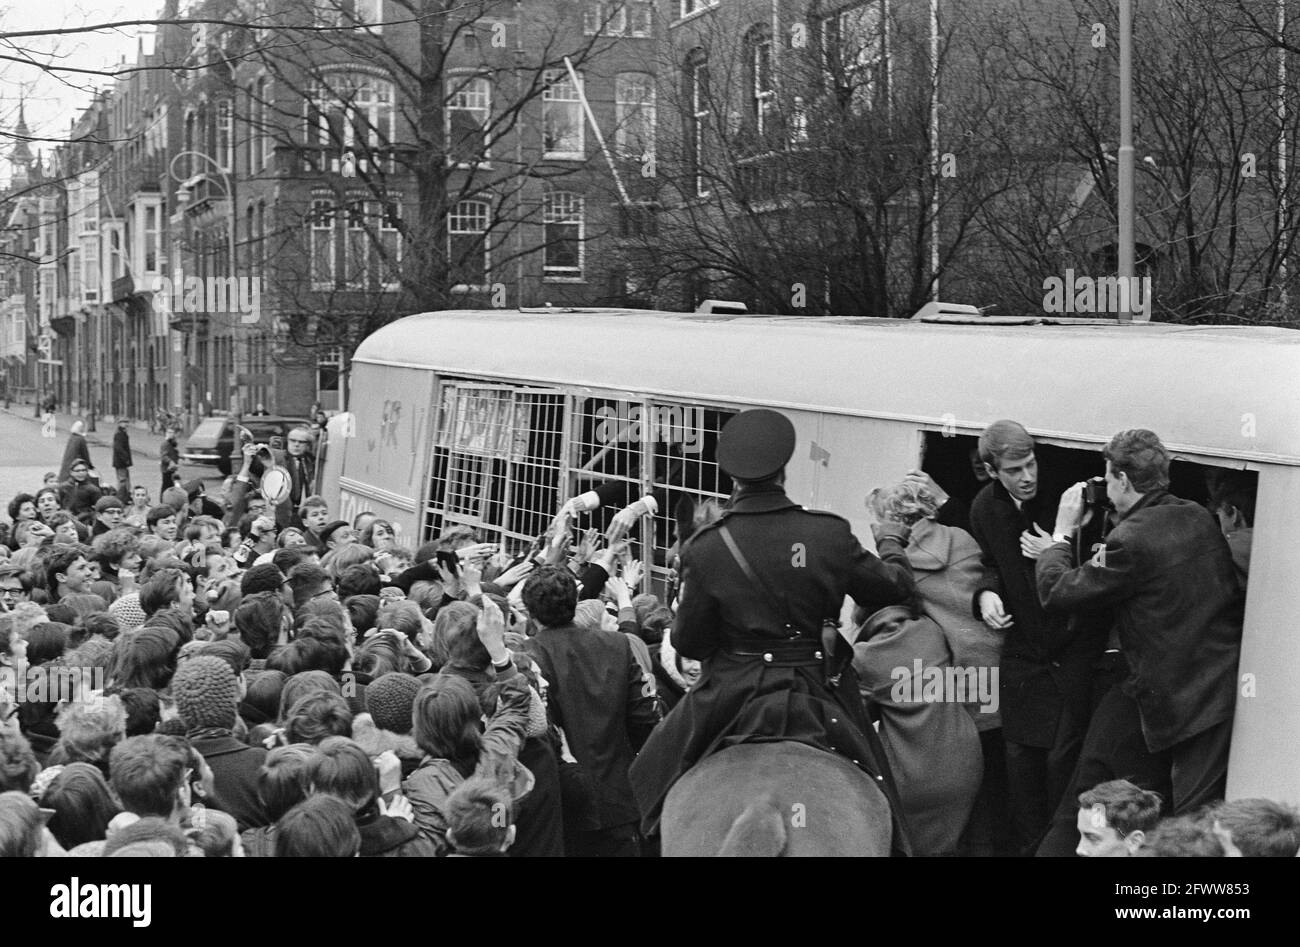 Dave Berry at Museum Square, Dave in the lion's cage extends arms to fans, February 5, 1966, fans, The Netherlands, 20th century press agency photo, news to remember, documentary, historic photography 1945-1990, visual stories, human history of the Twentieth Century, capturing moments in time Stock Photo